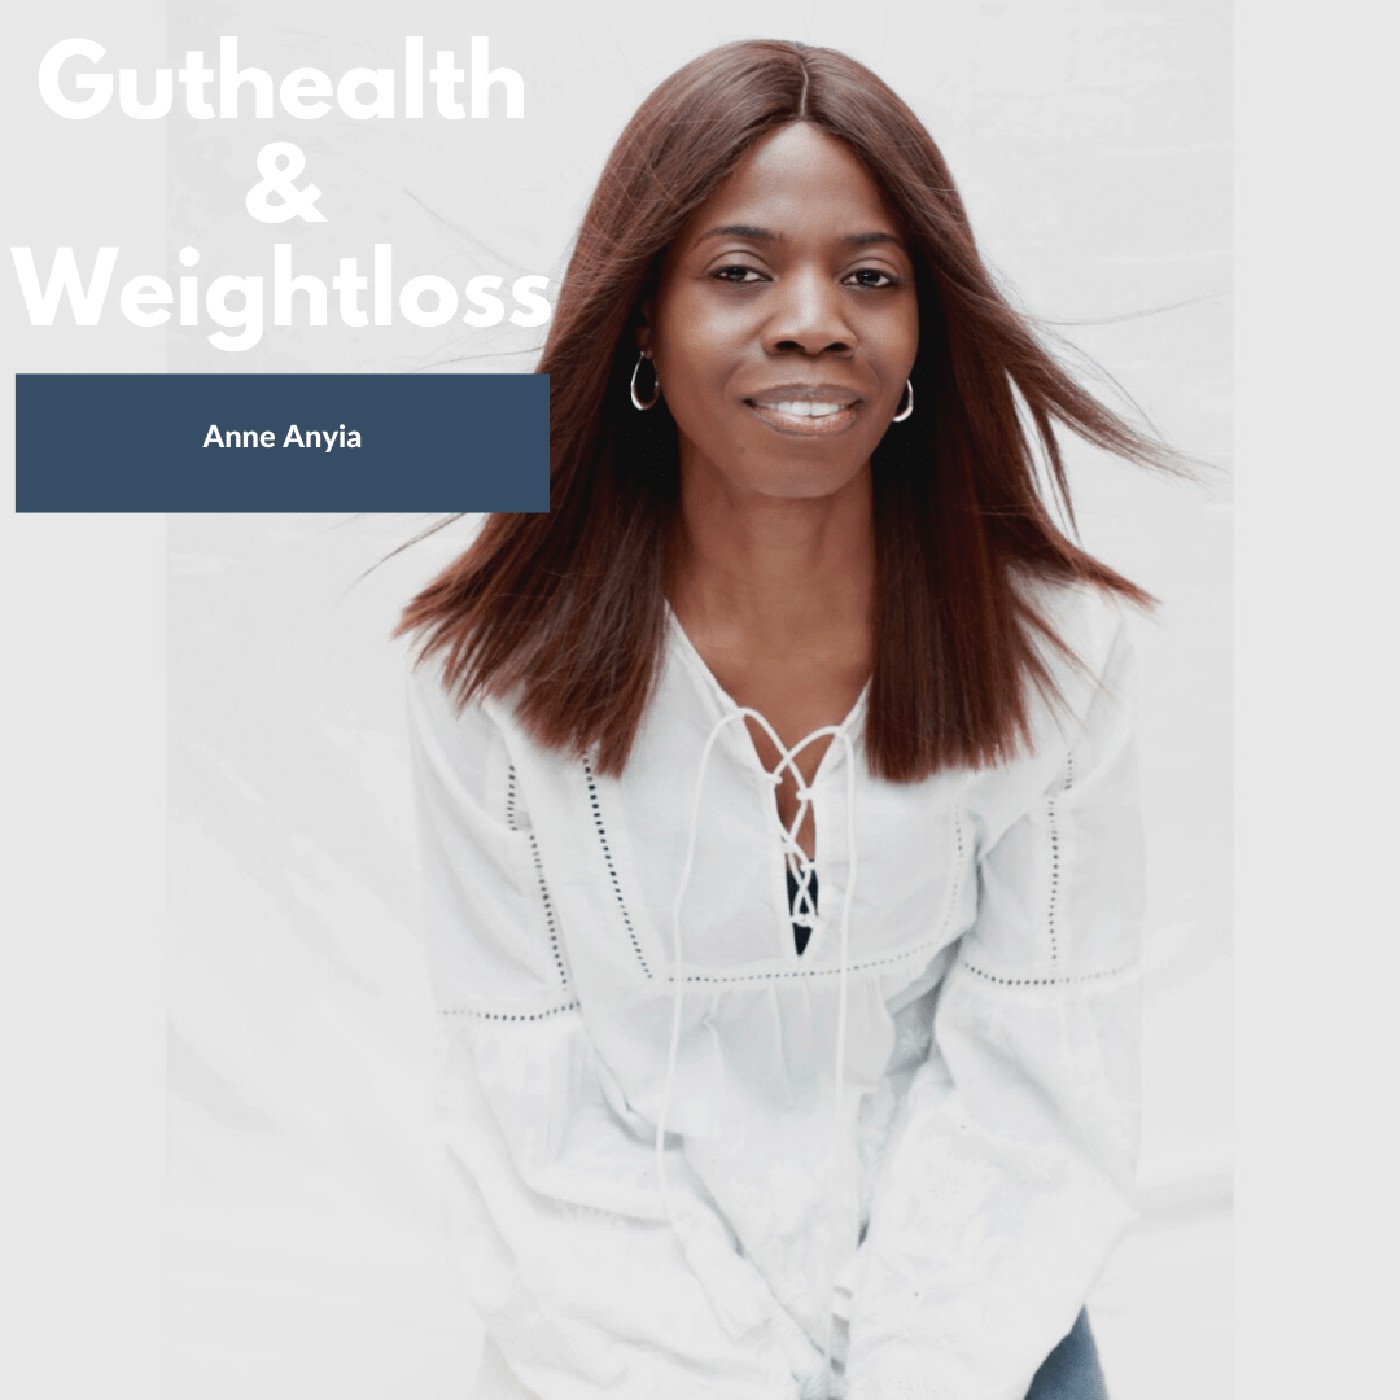 Functional Habits to Improve The Health of Your Gut with Award Winning Nutritionist Anne Anyia